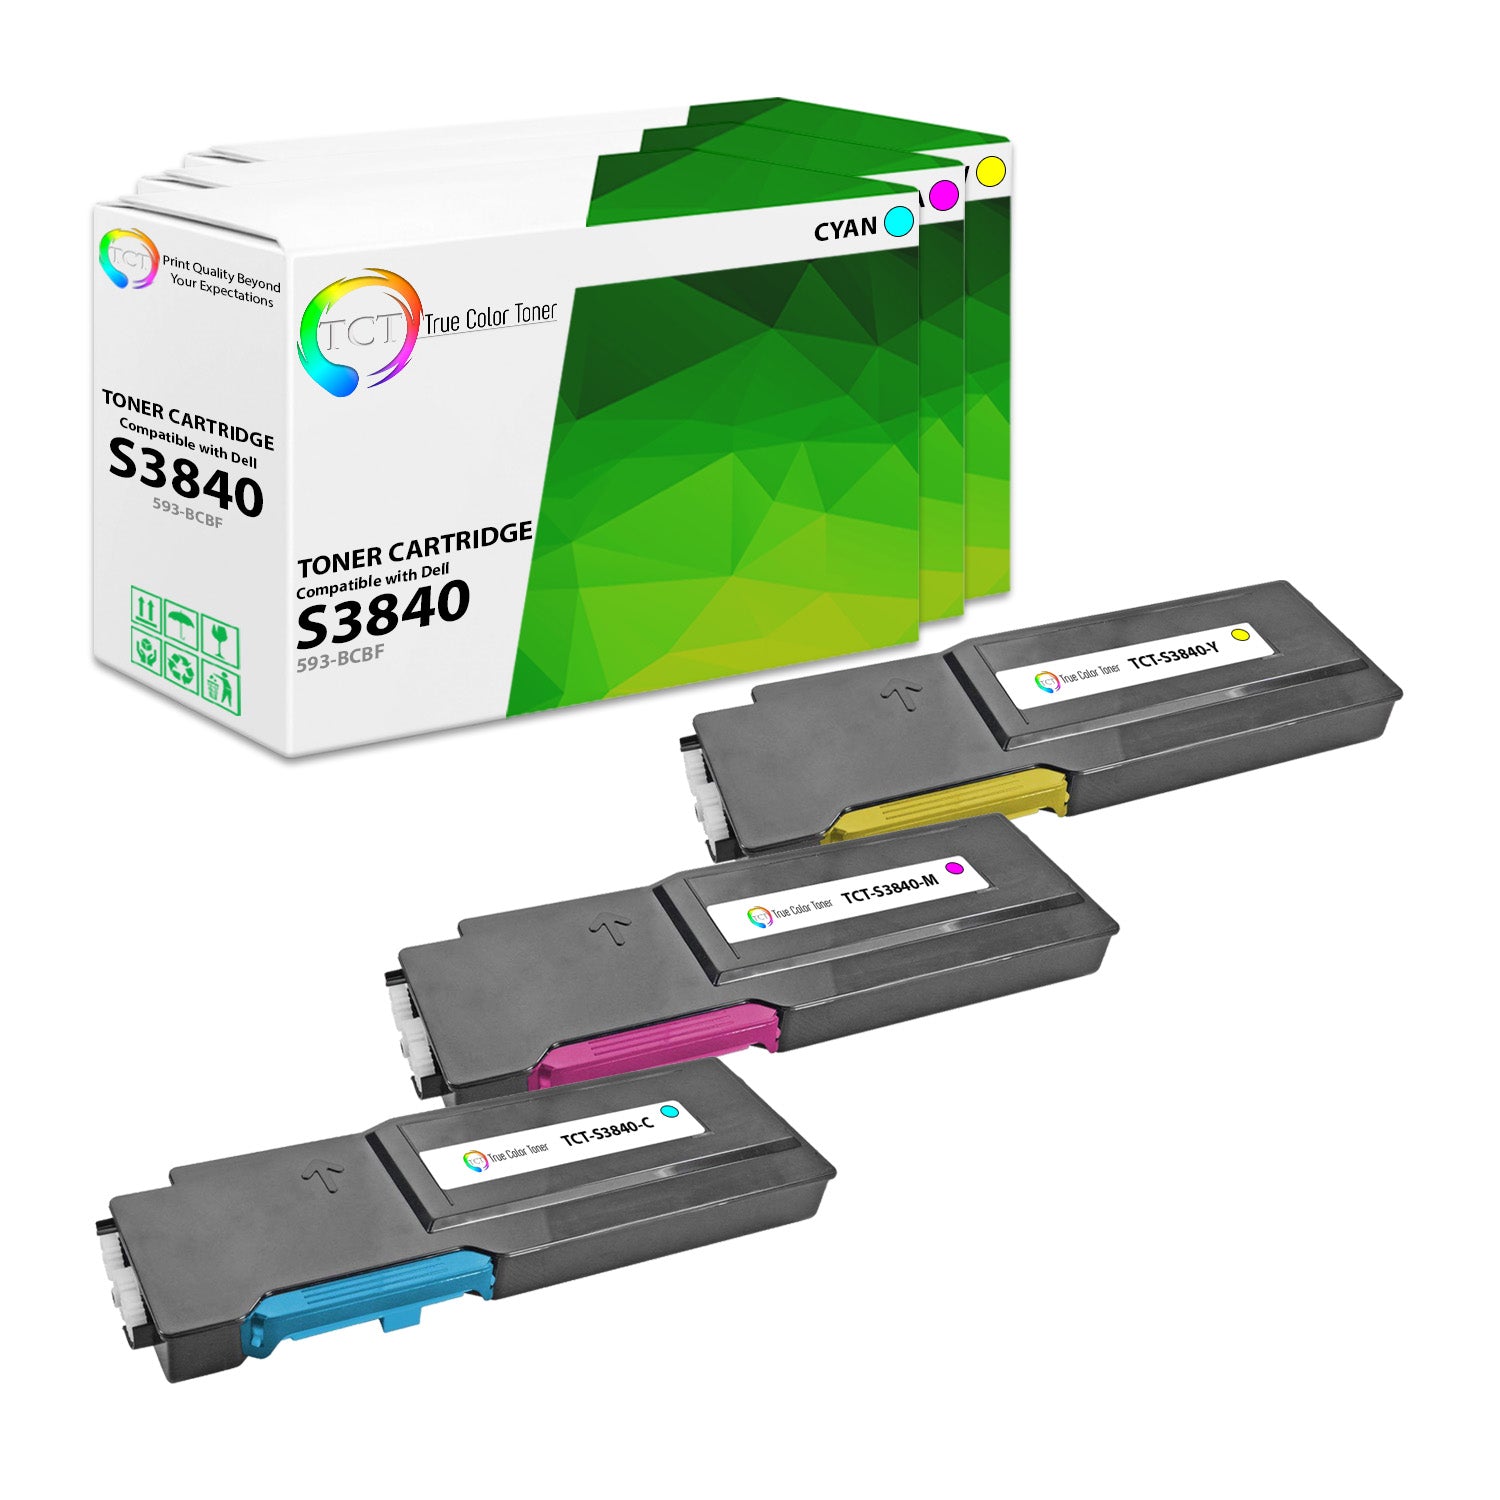 TCT Compatible Toner Cartridge Replacement for the Dell S3840 Series - 3 Pack (C, M, Y)